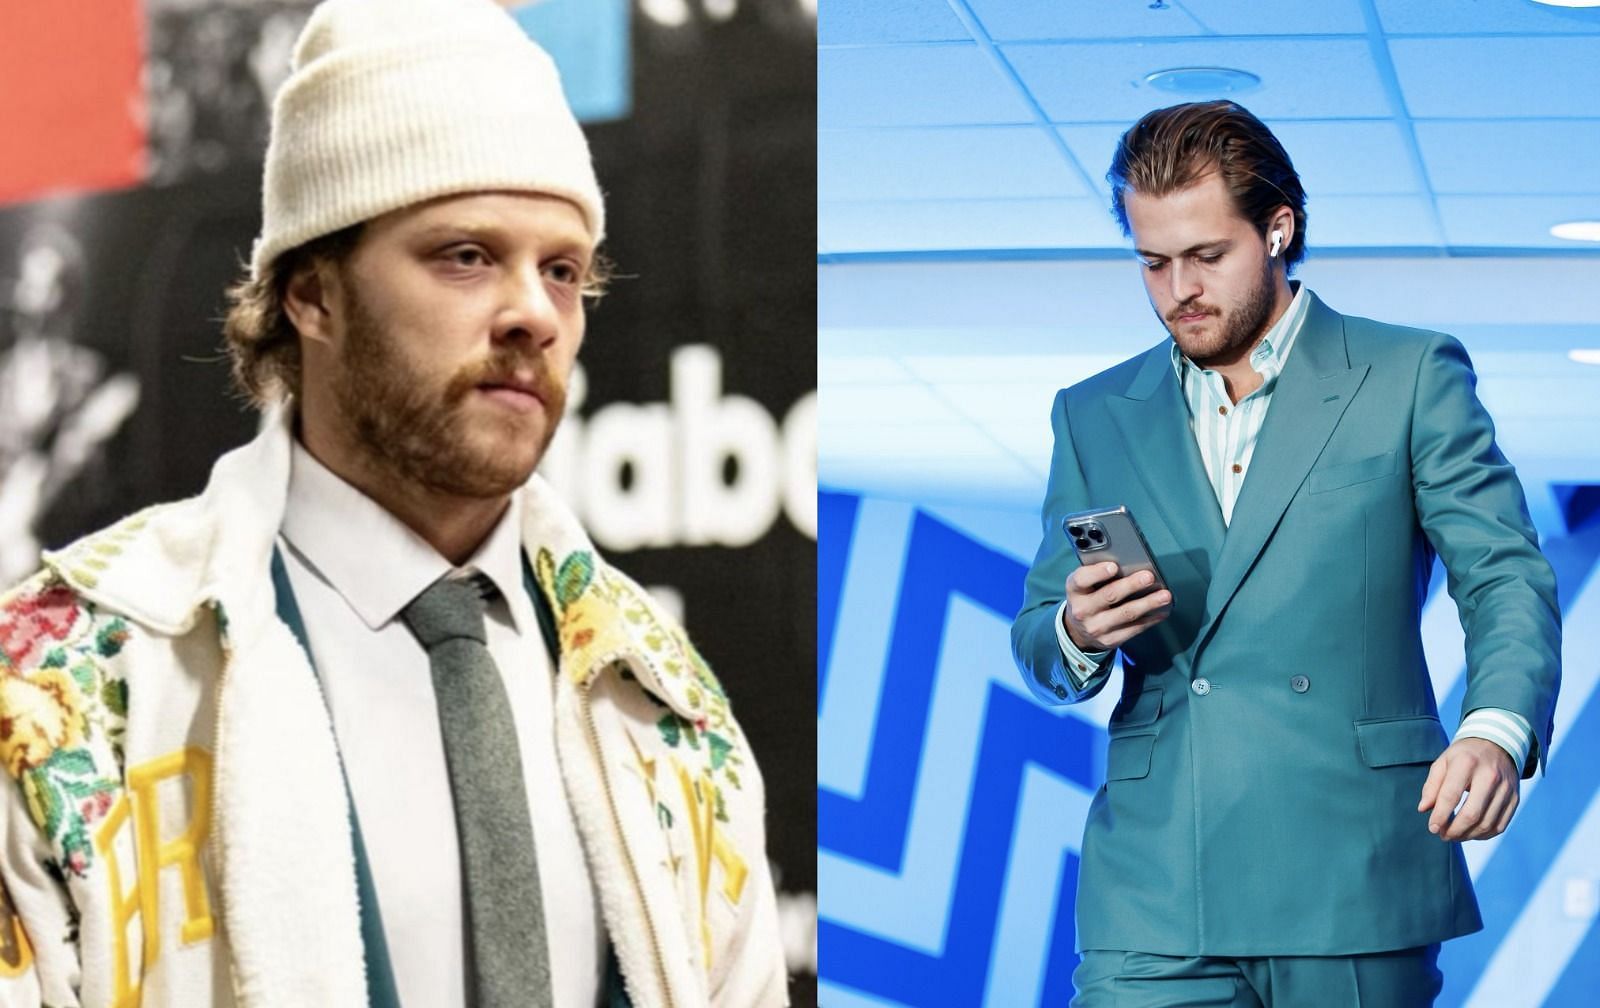 David Pastrnak, William Nylander and other NHL stars embrace the festive cheer with stunning holiday fits